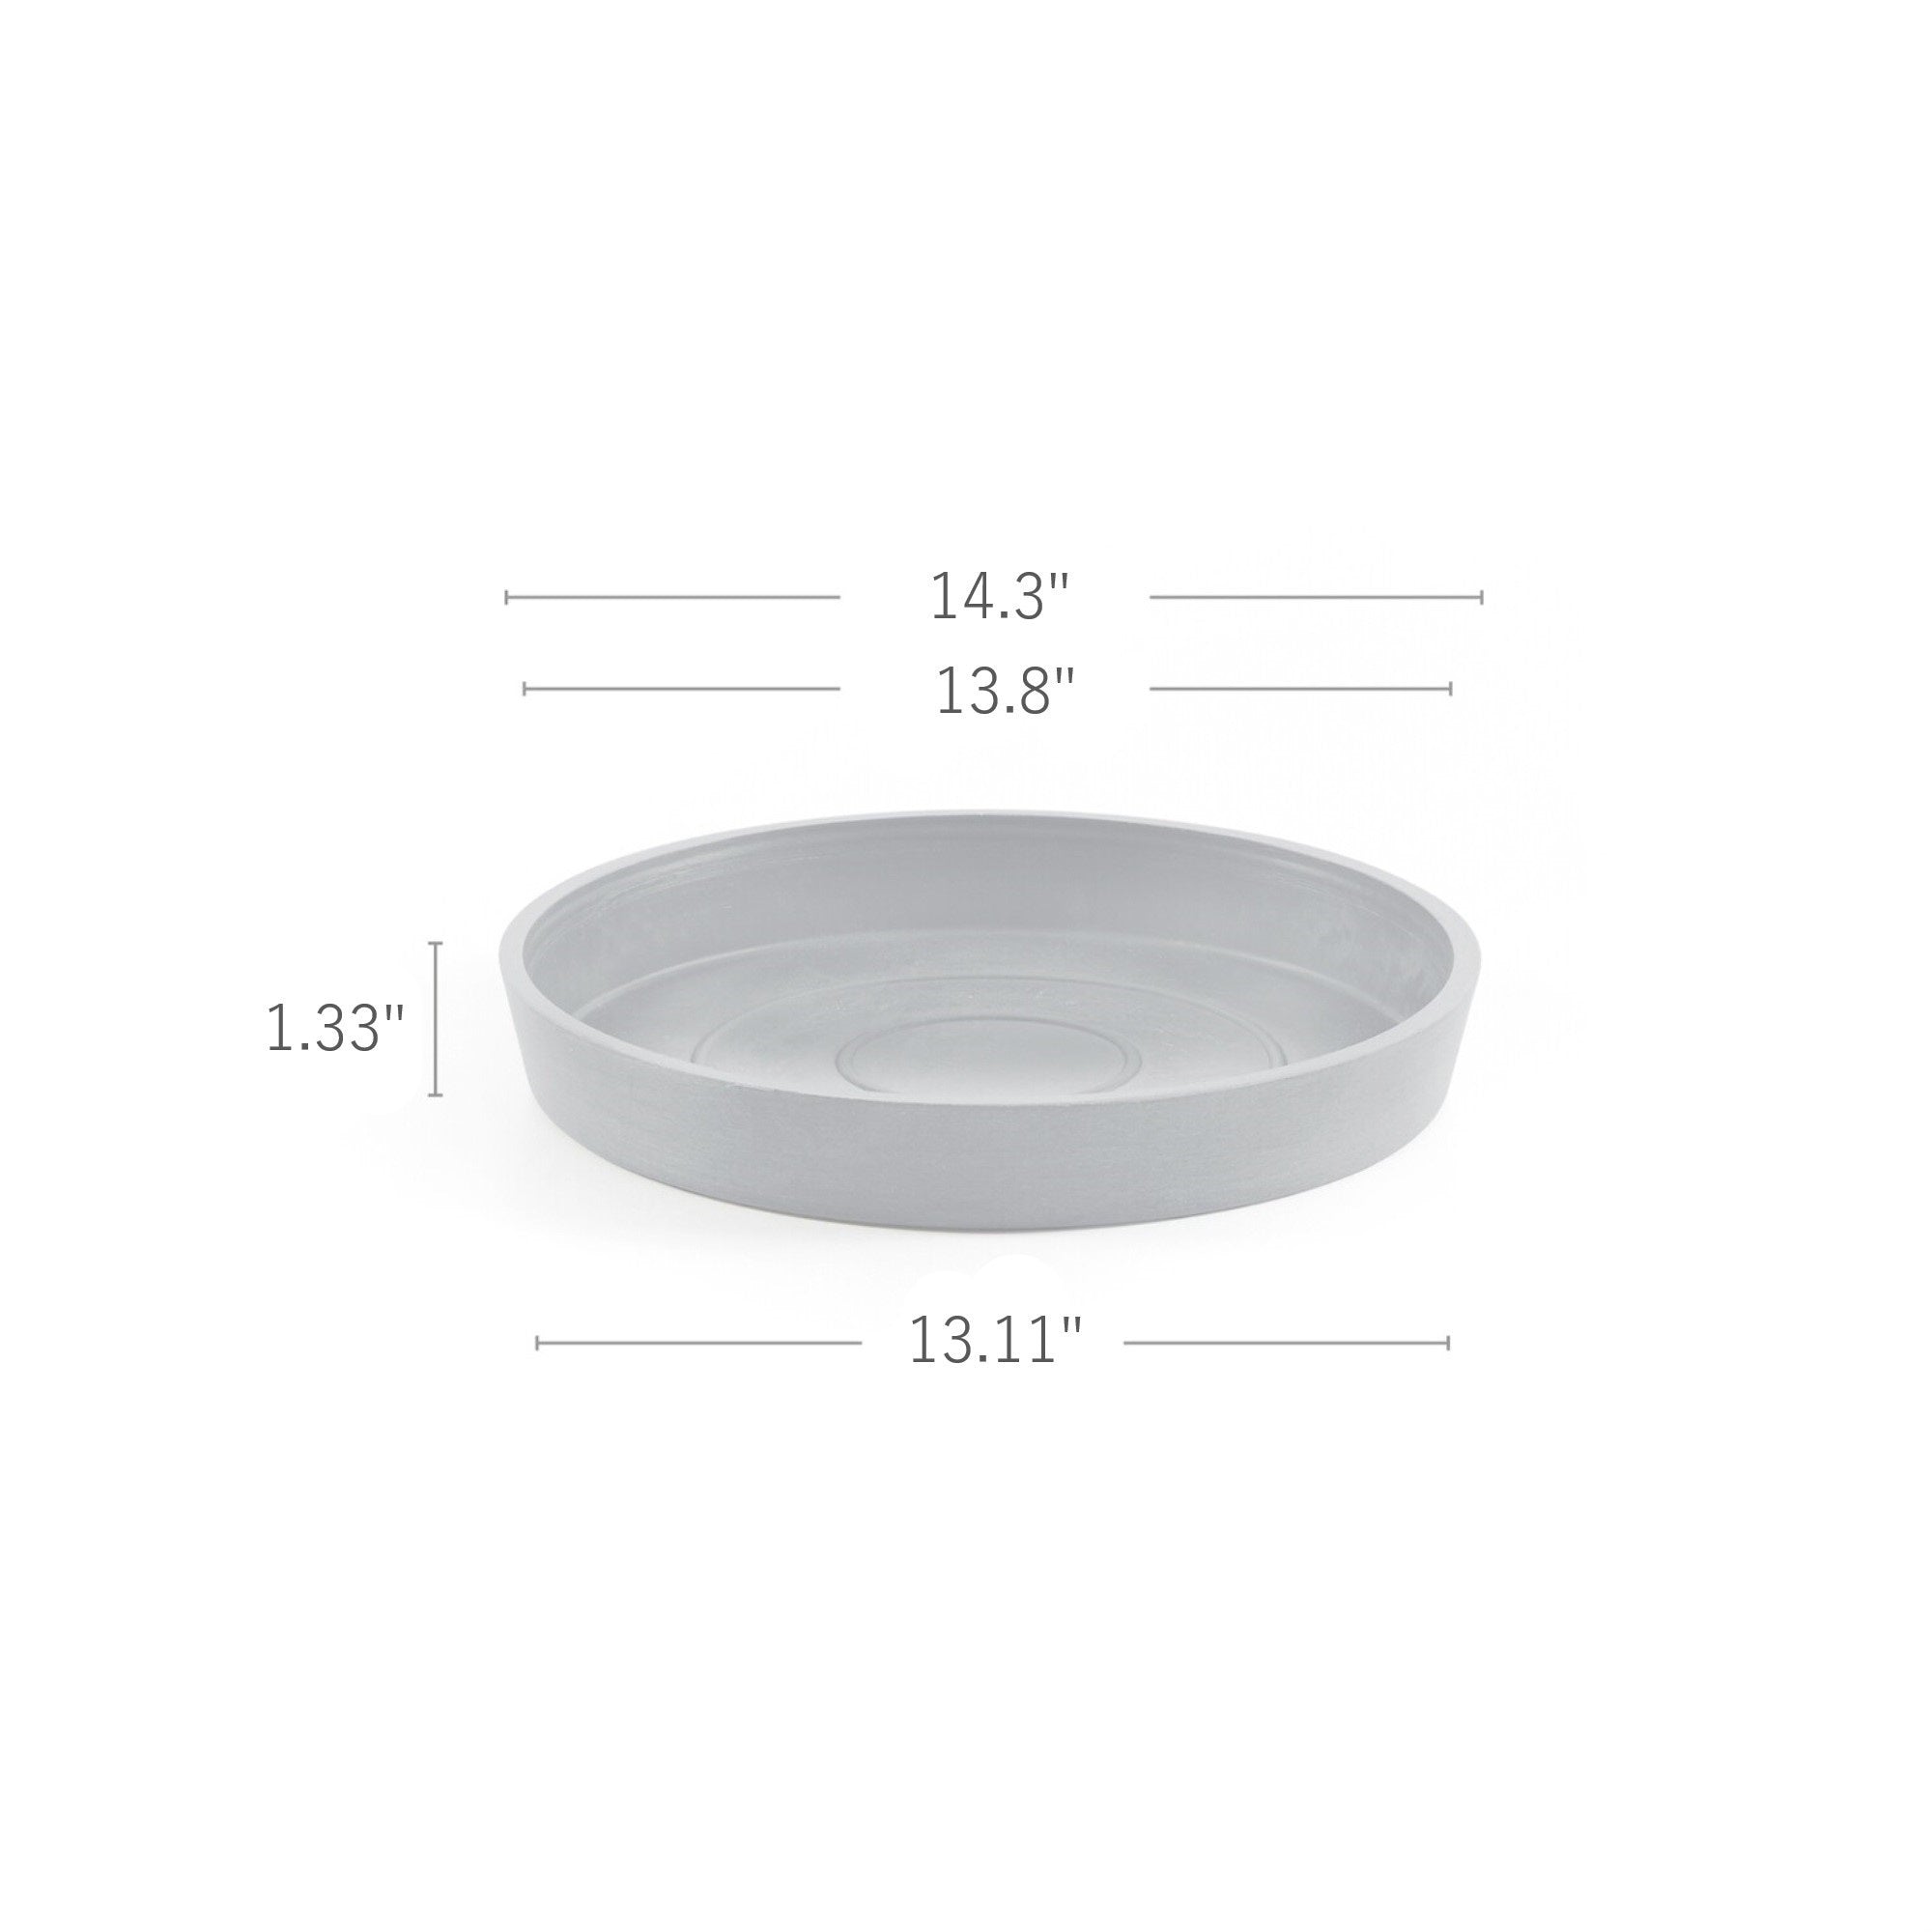 Ecopots Round Recycled Plastic Modern In/Outdoor Planter Flower Pot Saucer, White Grey, 14"